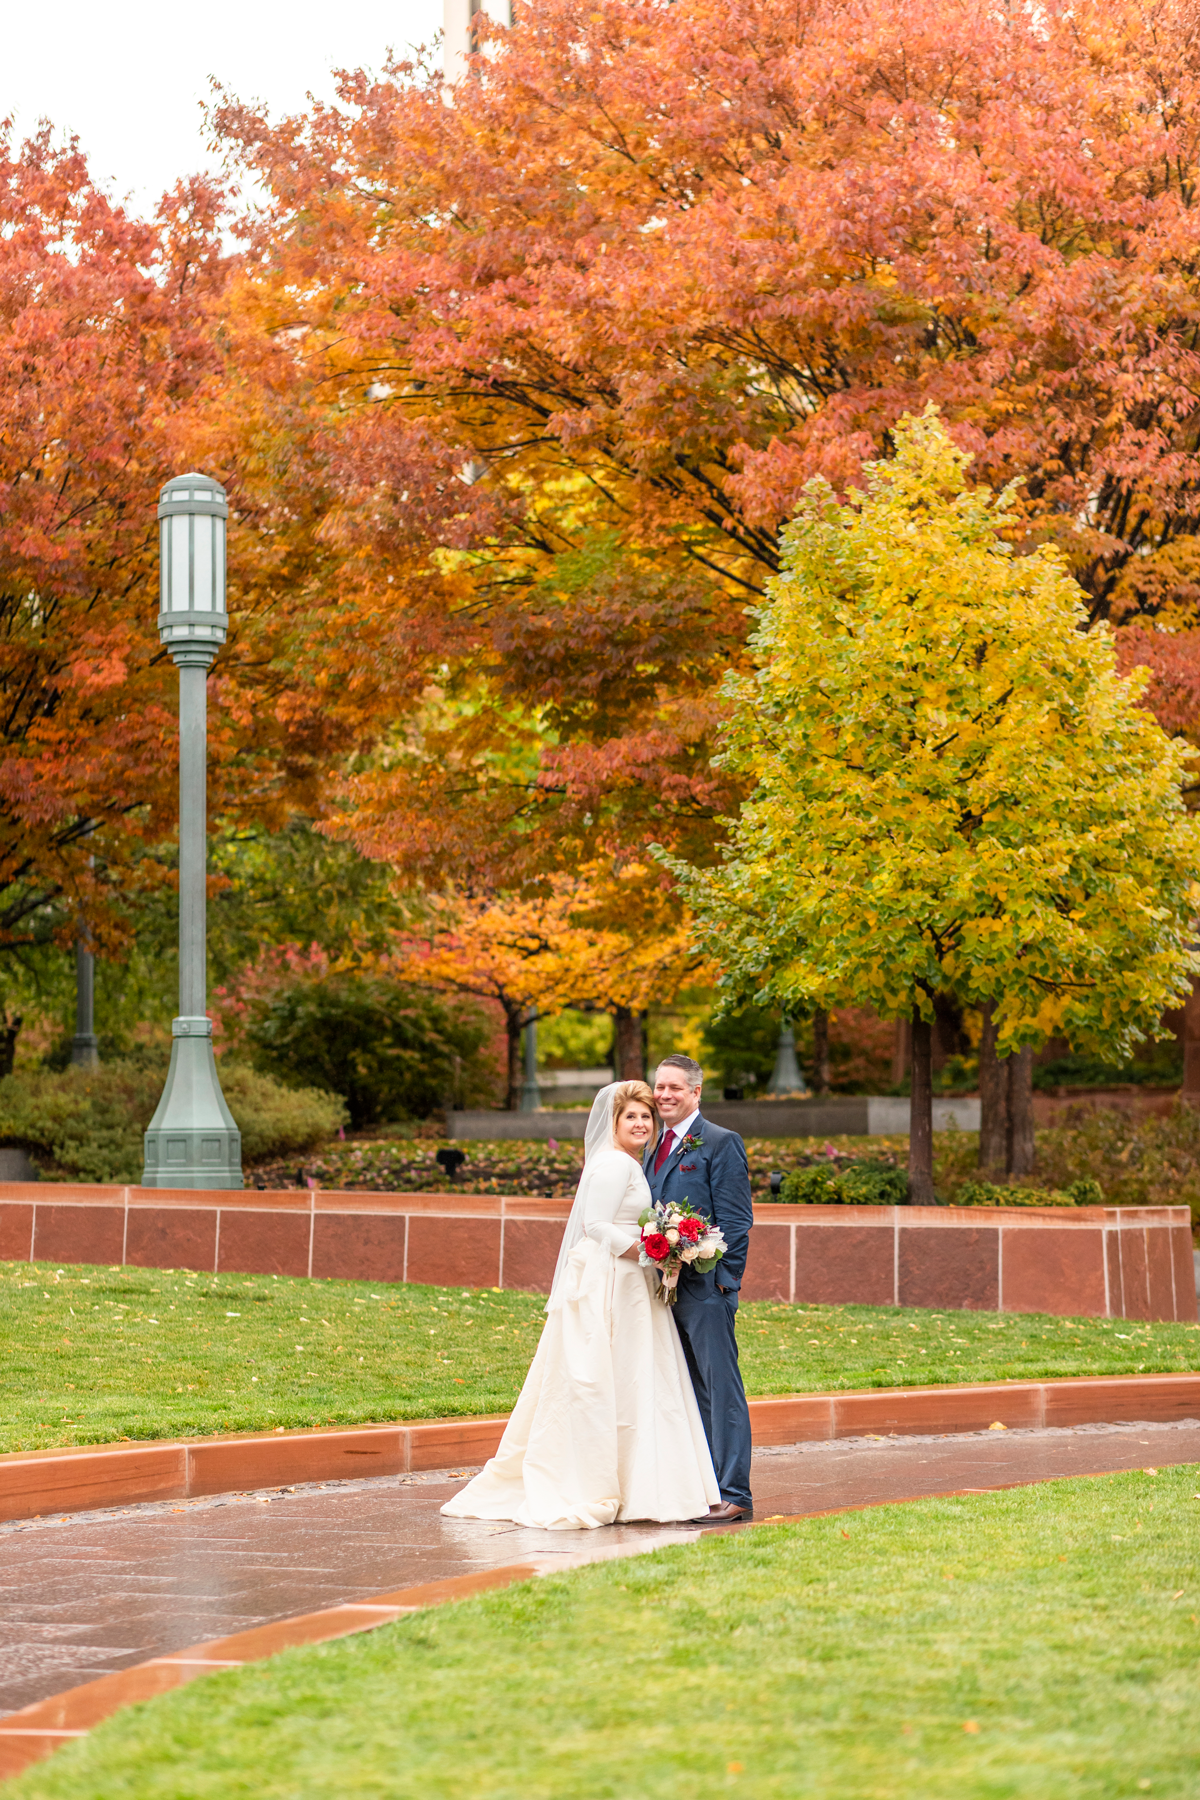  red orange green fall colored leaves salt lake city lds temple grounds just married hugging smiling rainy wedding day fall wedding red and white rose wedding bouquet professional salt lake city wedding photographer #saltlakeldstemple #saltlakecityut